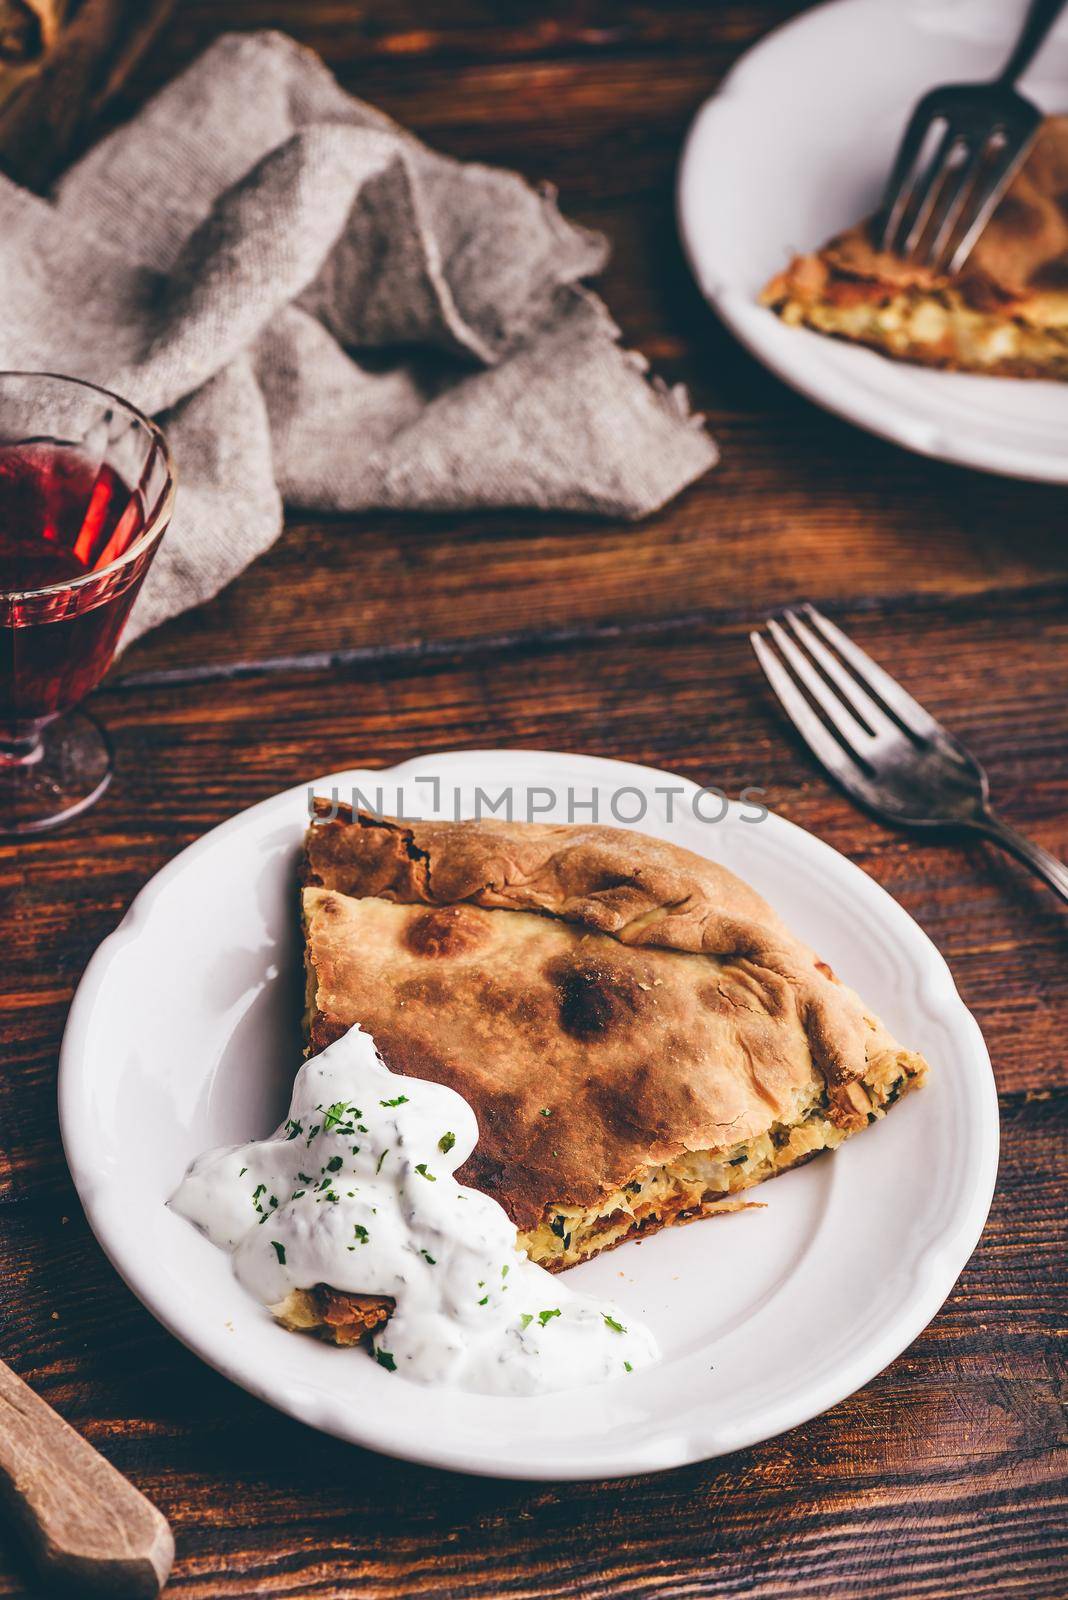 Slice of cabbage pie with sour cream sauce by Seva_blsv